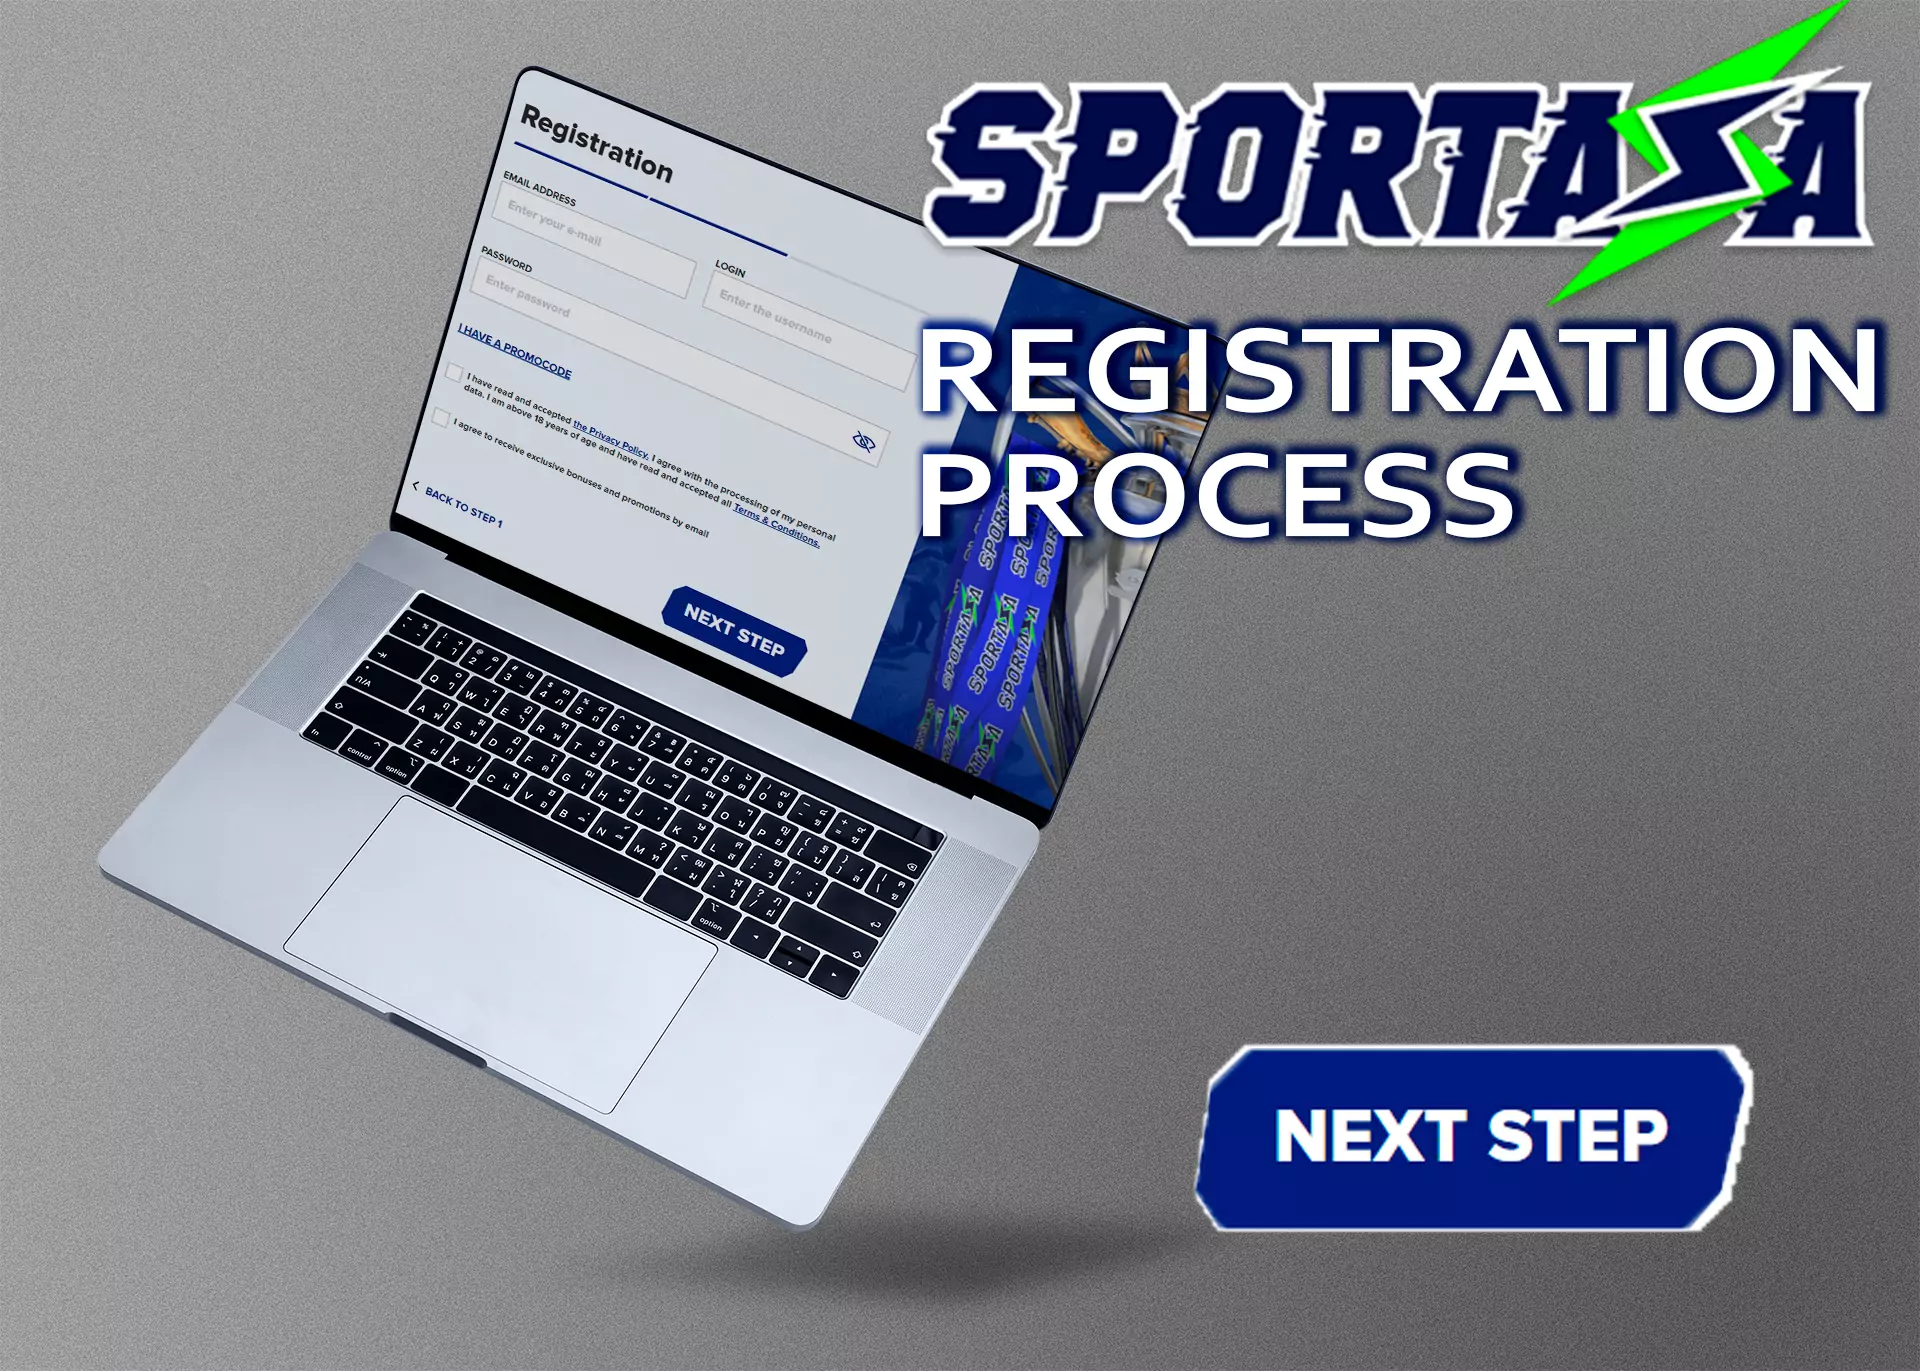 Registering an account at Sportaza is simple and easy.